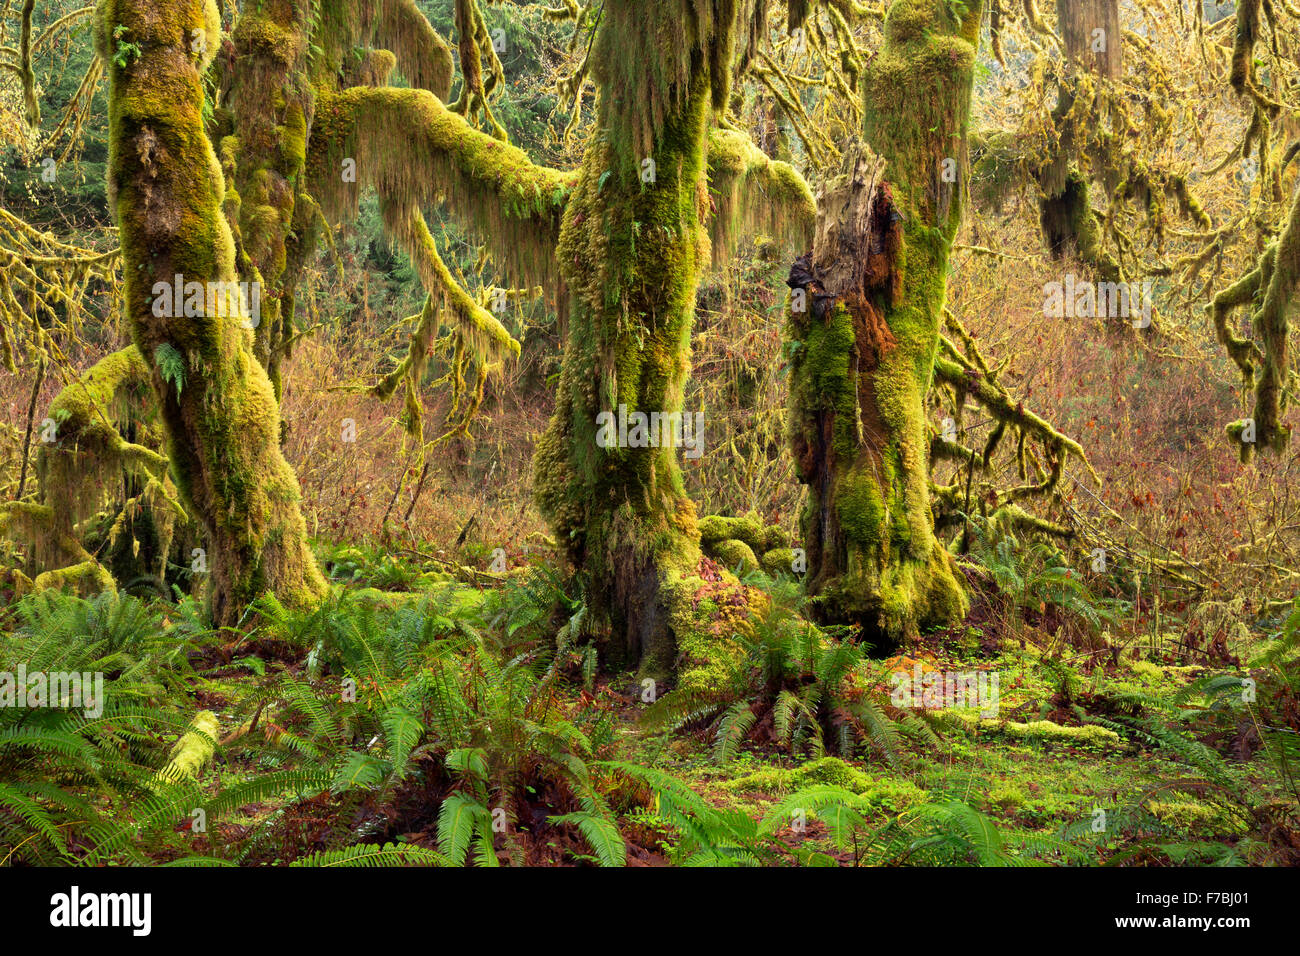 Moss covering trees in Hall of Mosses, a temperate rain forest environment, in the Hoh River Valley of Olympic National Park. Stock Photo